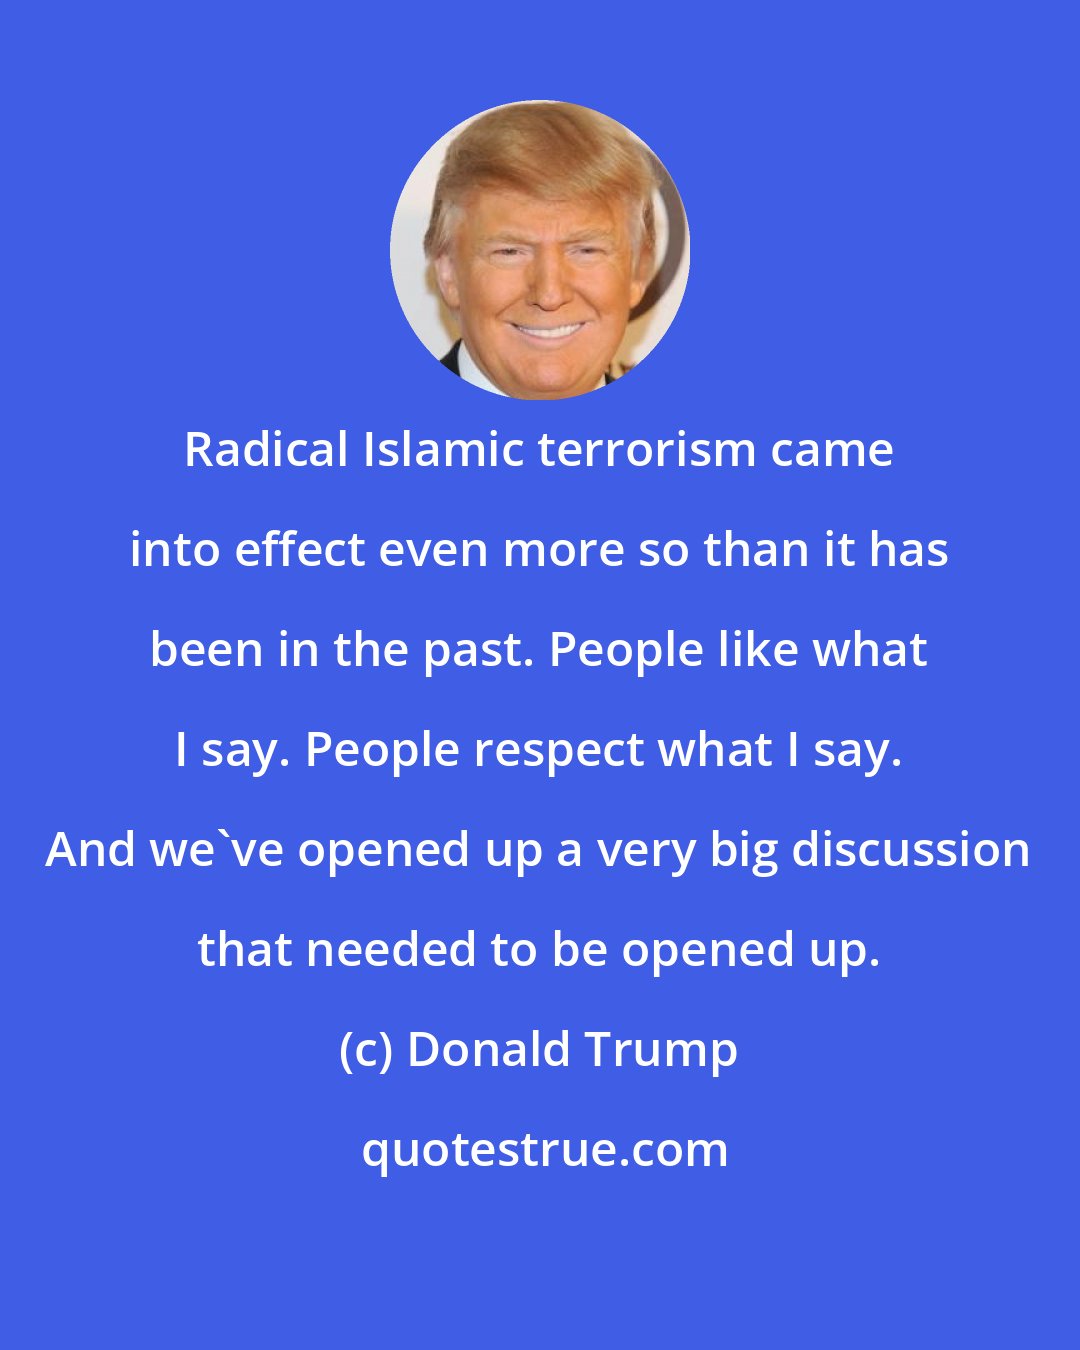 Donald Trump: Radical Islamic terrorism came into effect even more so than it has been in the past. People like what I say. People respect what I say. And we've opened up a very big discussion that needed to be opened up.